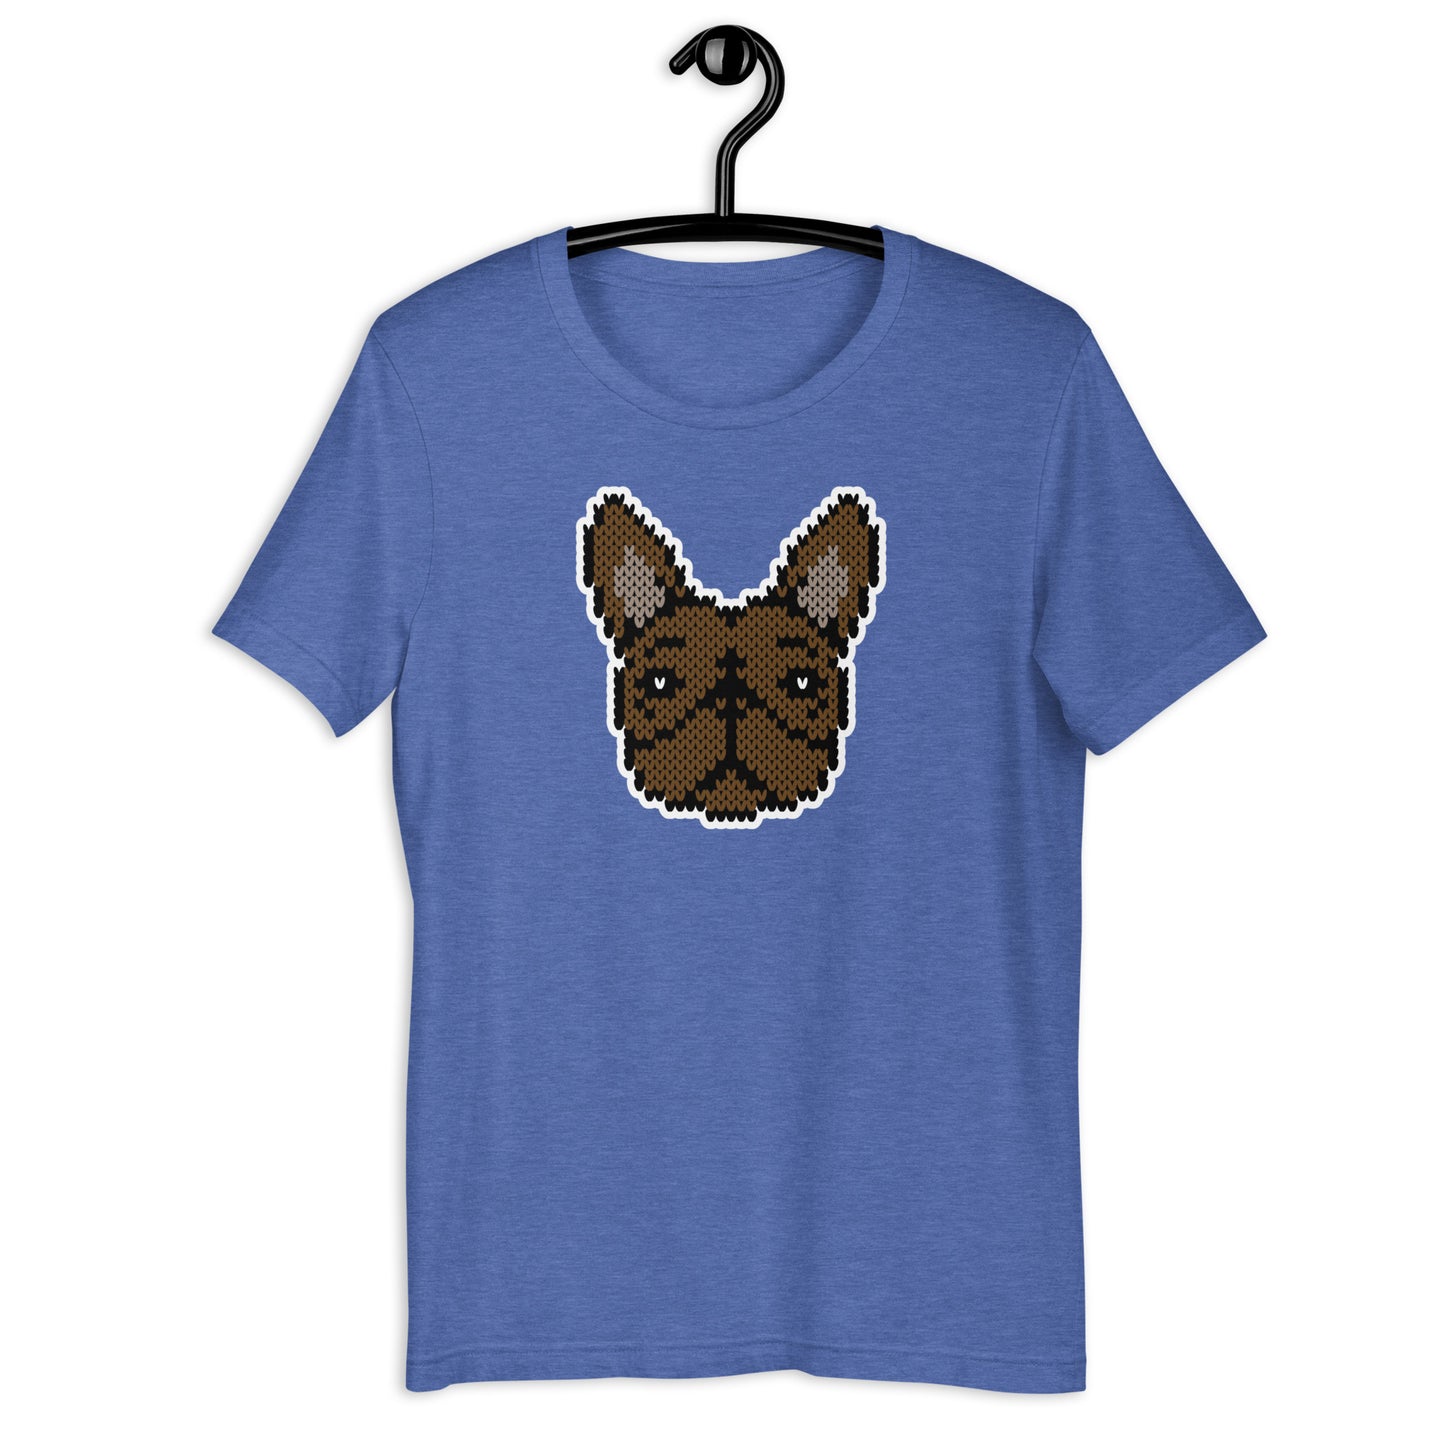 COZY Unisex T-Shirt Frenchie Brown